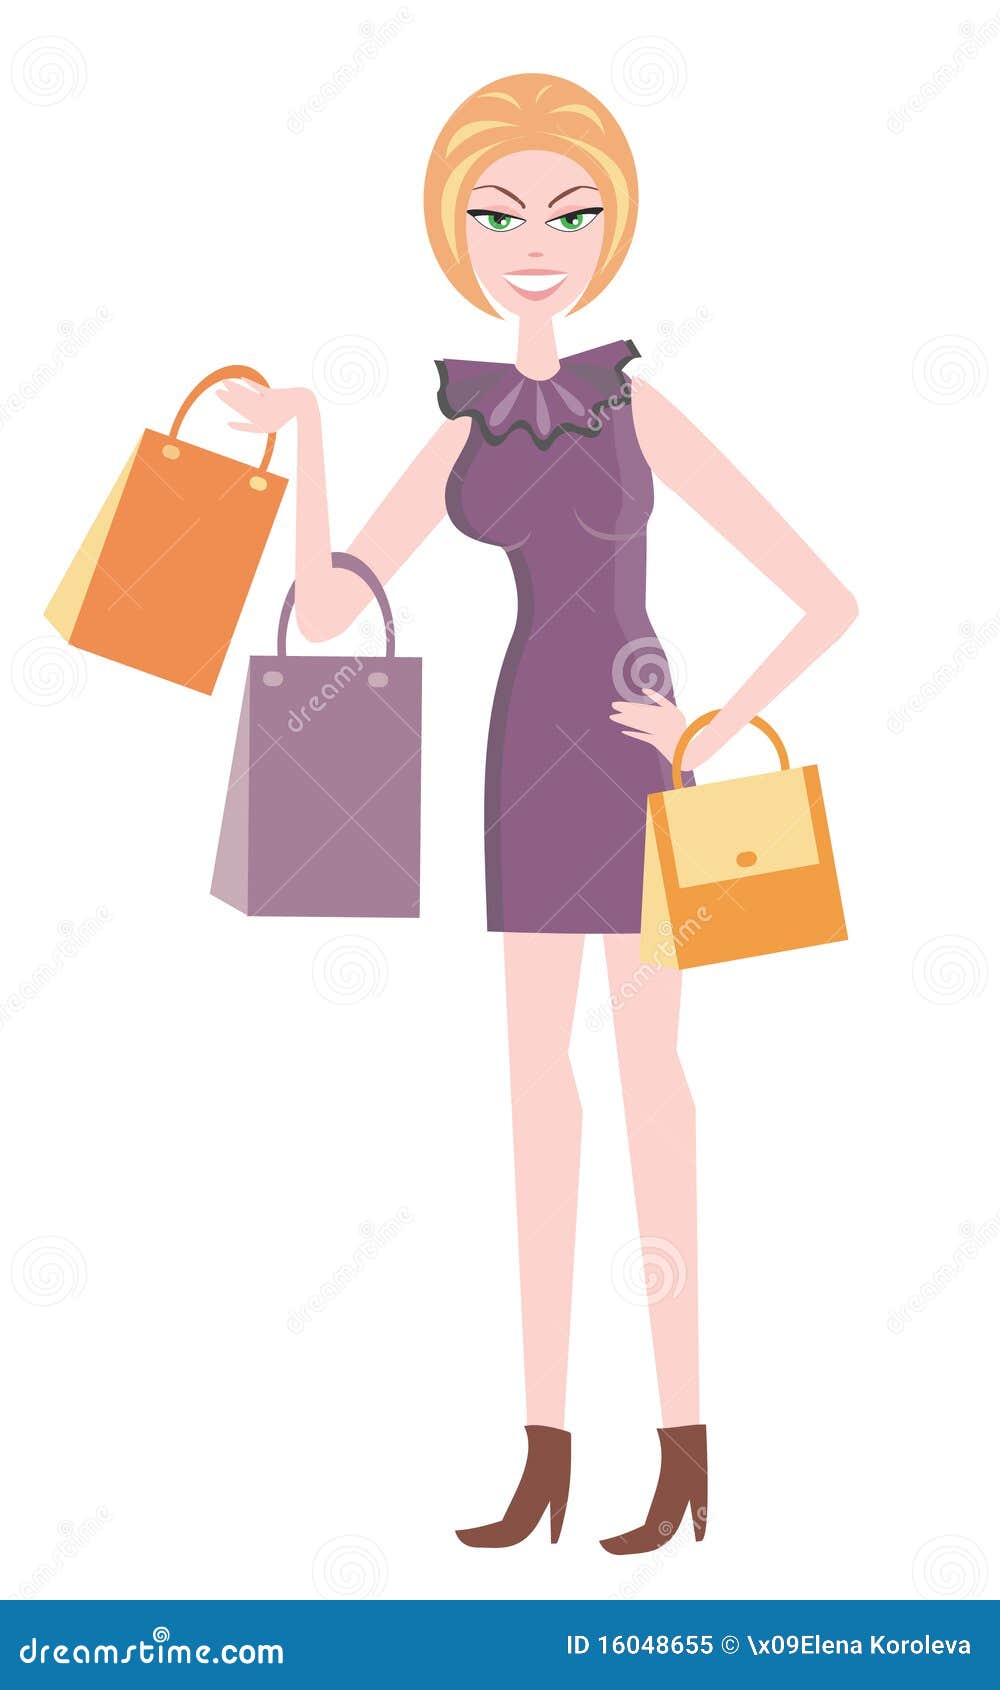 The Beautiful Girl with Buying. Stock Vector - Illustration of happy ...